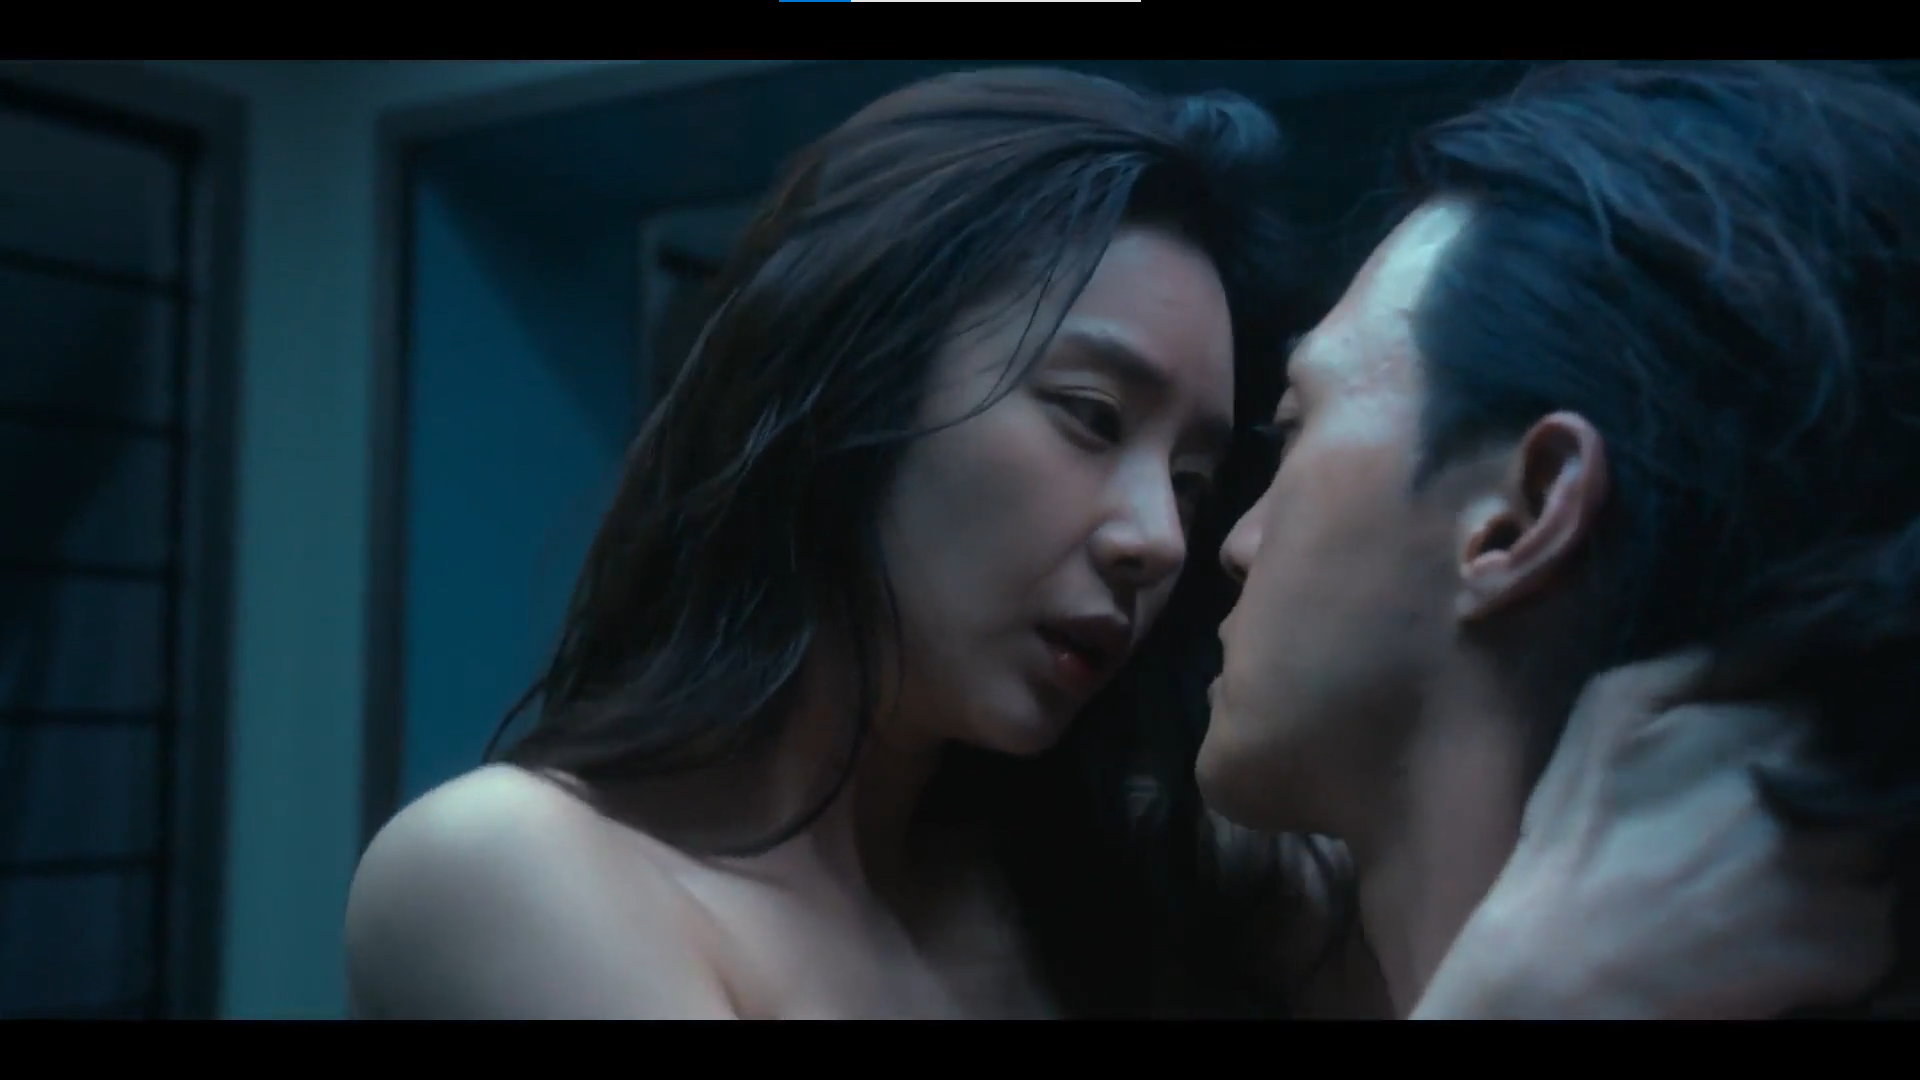 10 K Dramas On Netflix And Streaming Sites With Shockingly Hot Scenes From The Glory To